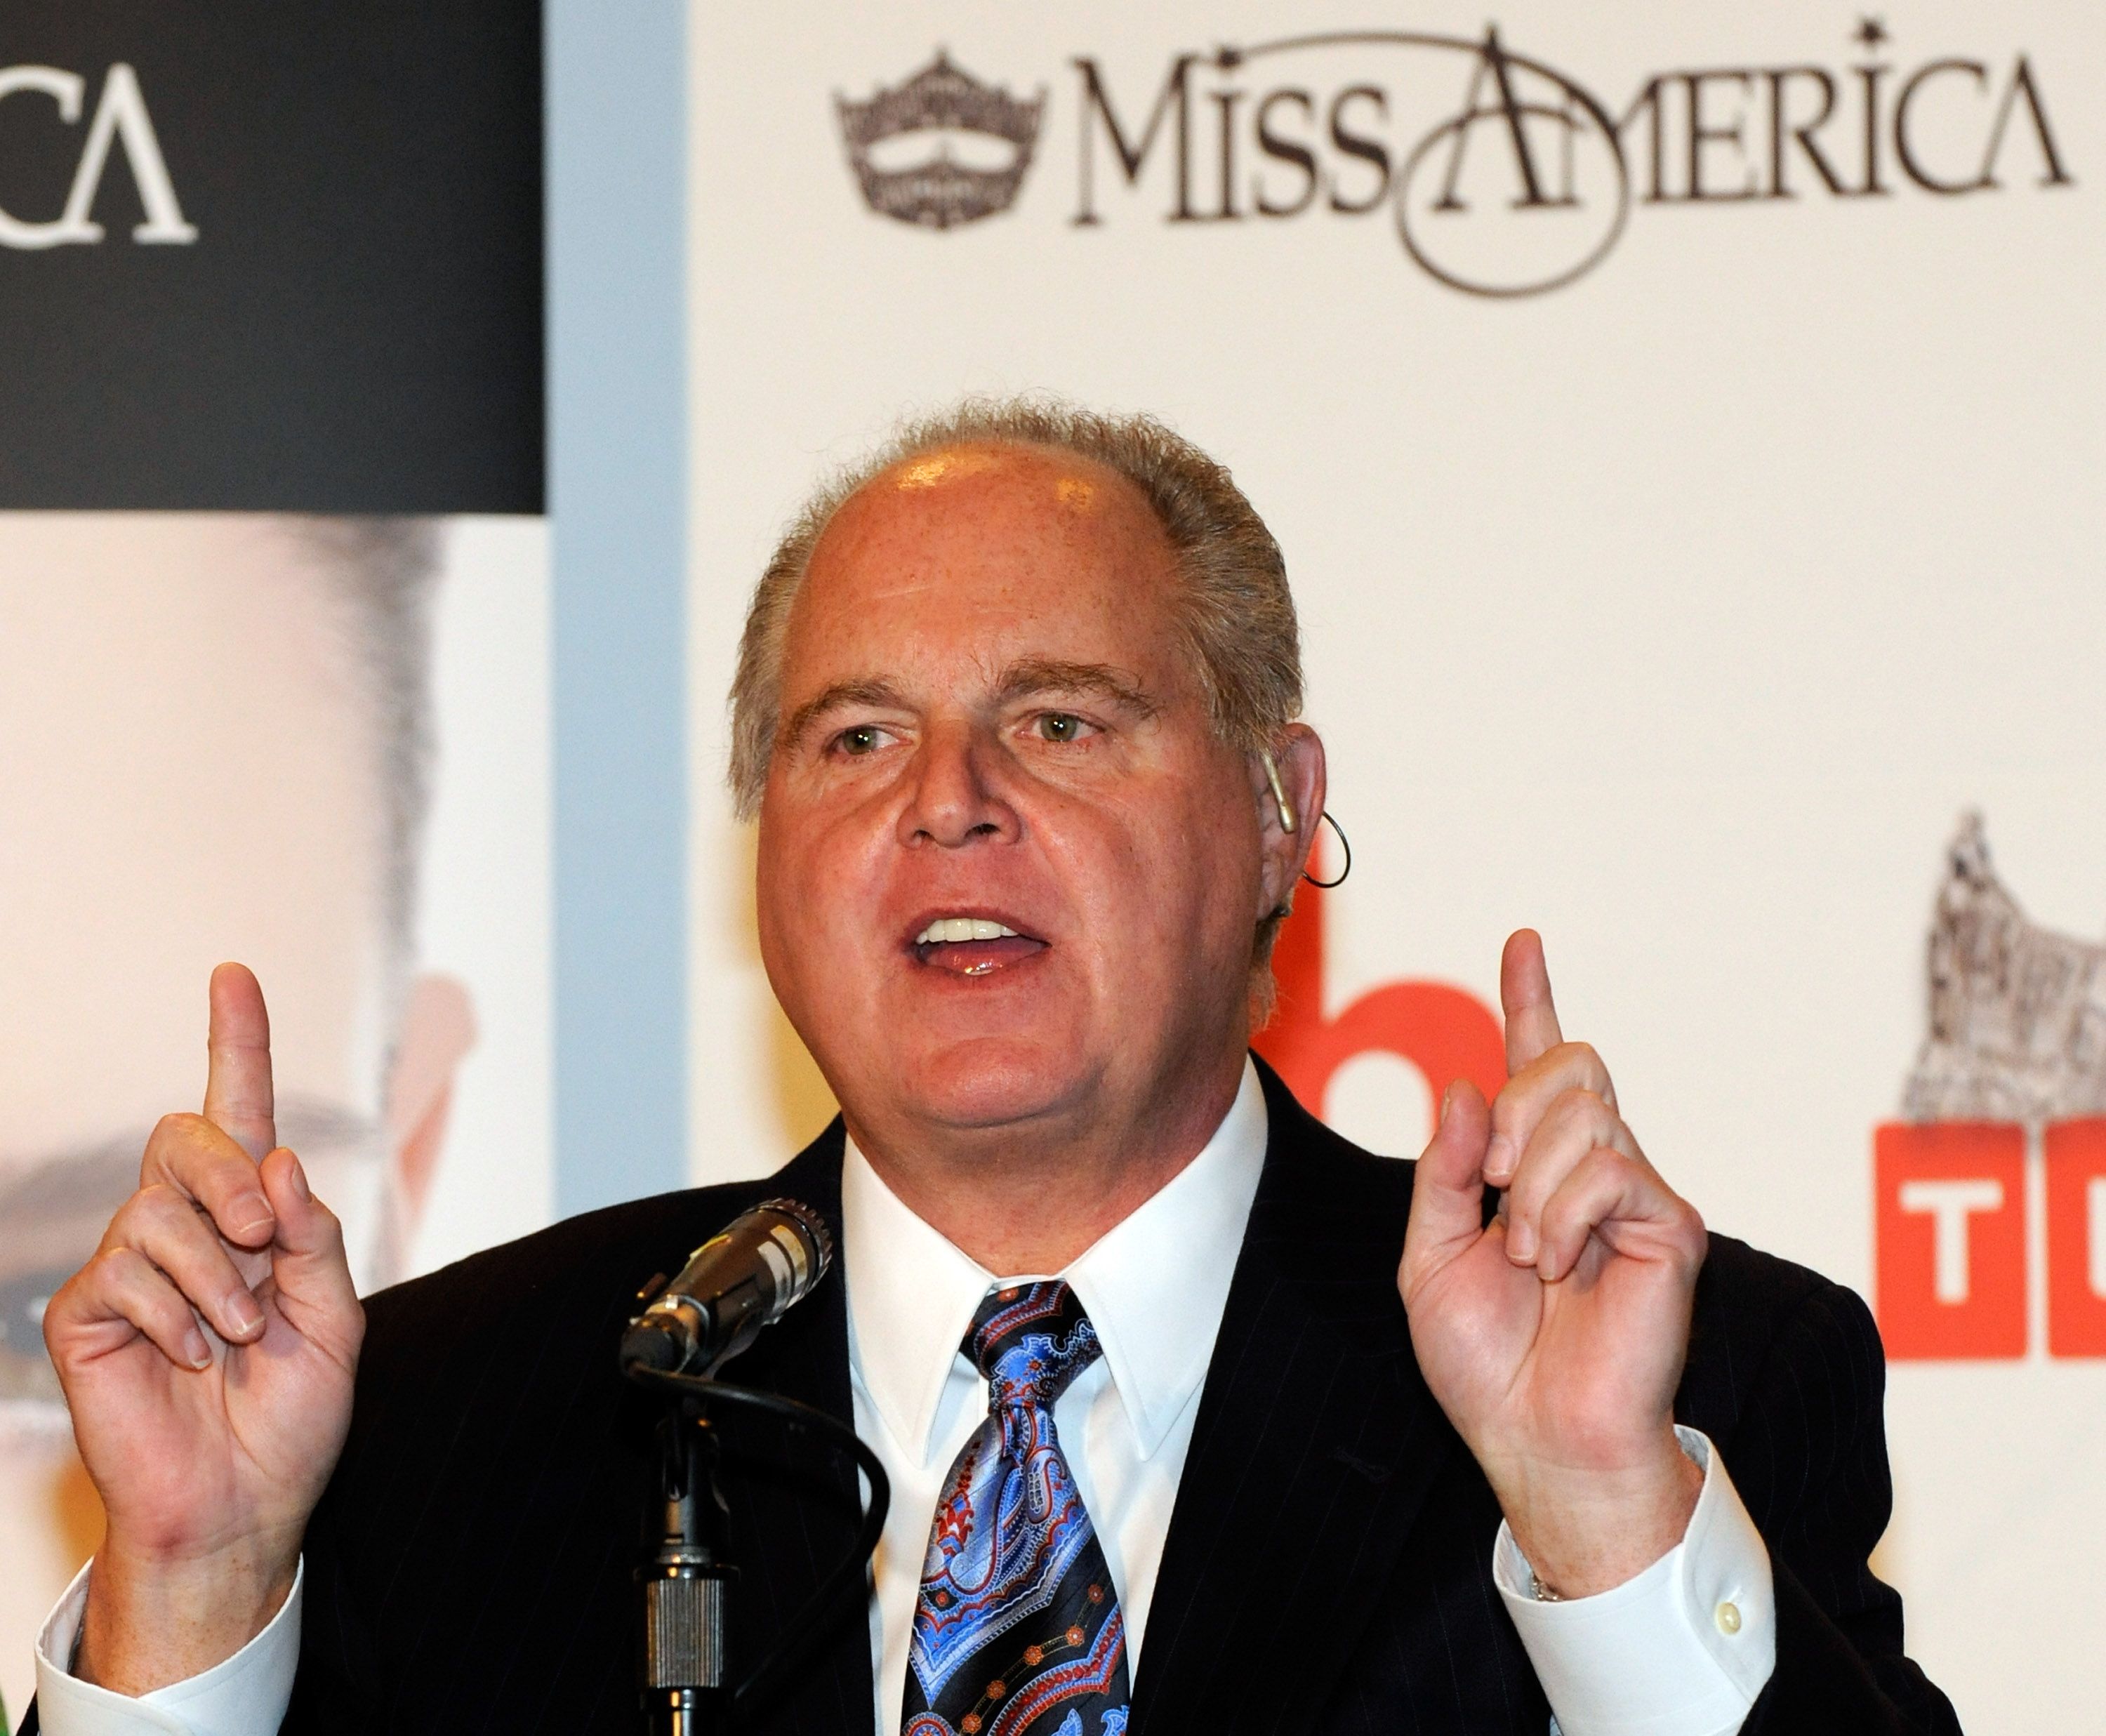 Rush Limbaugh during a news conference for Miss America Pageant judges on January 27, 2010, in Las Vegas, Nevada. | Source: Getty Images